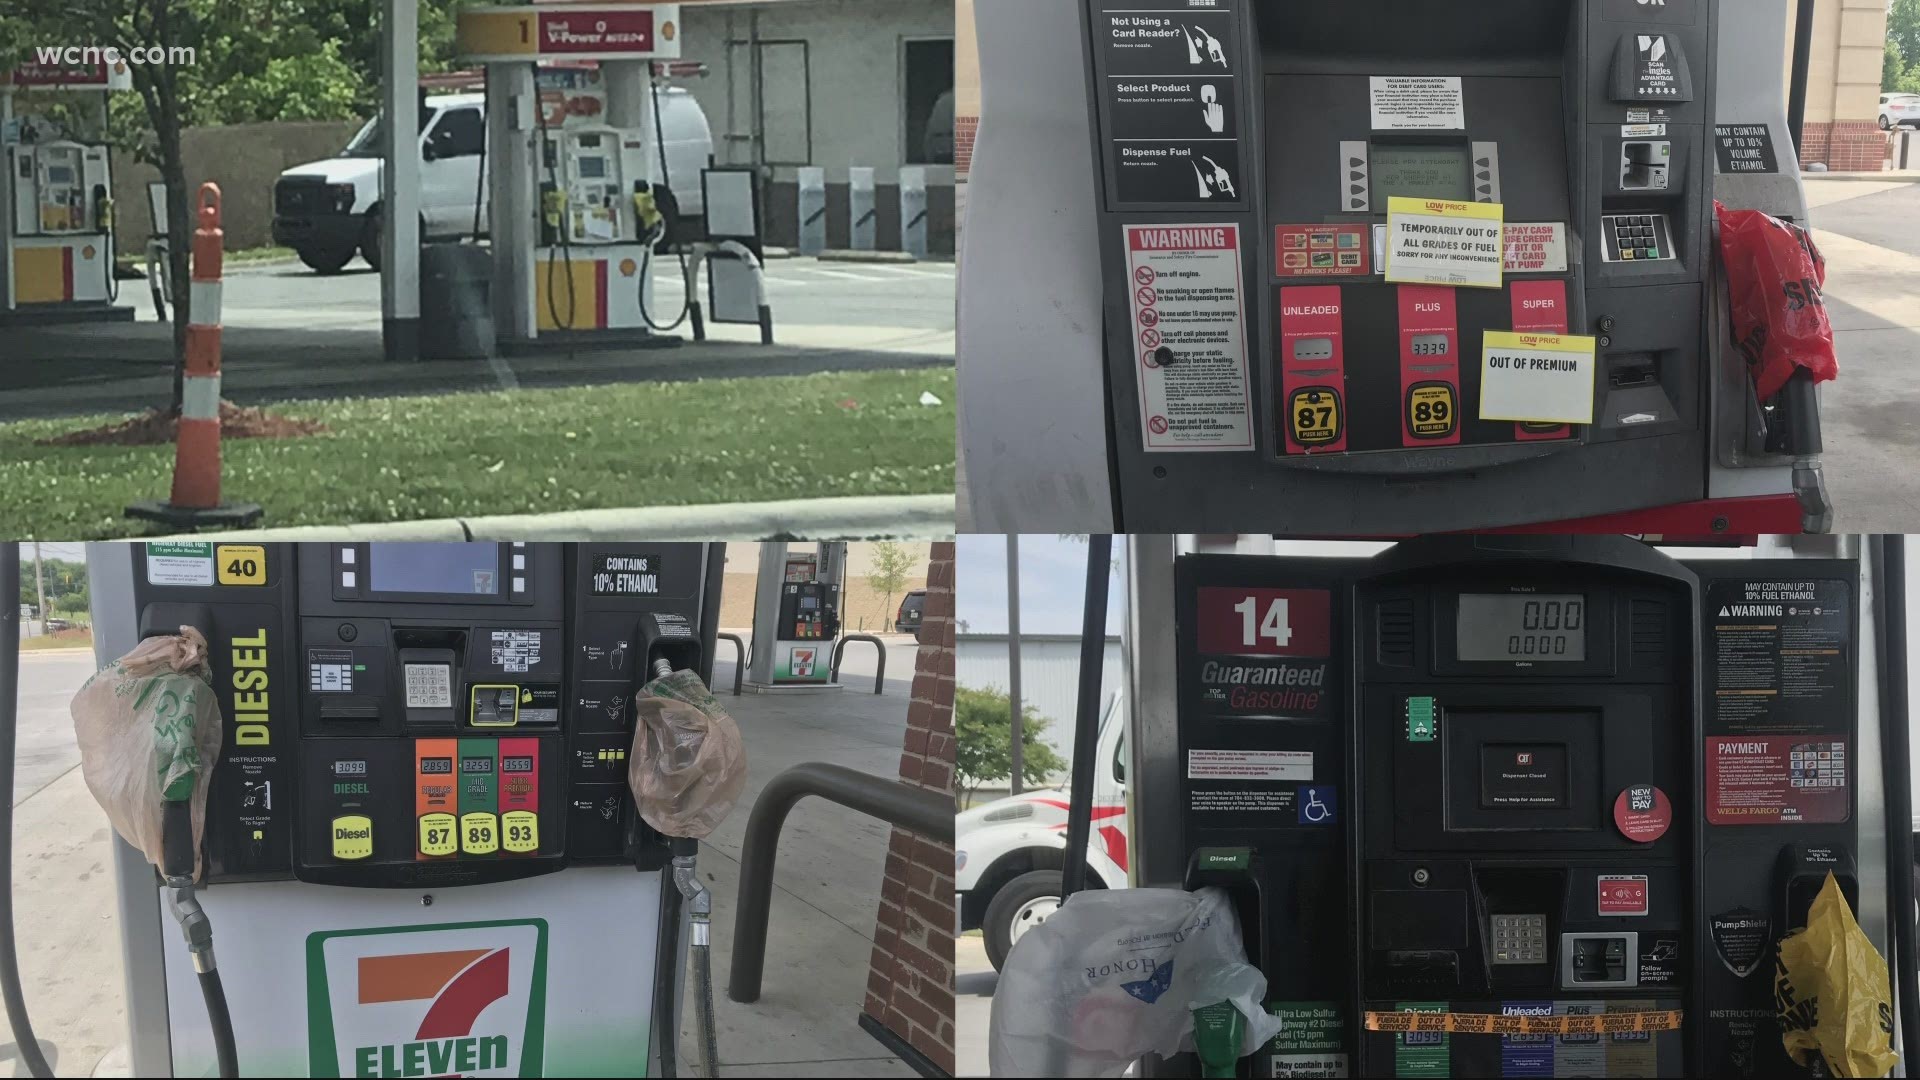 A small gas station is hoping to better serve its customers soon after a cyberattack hit home.